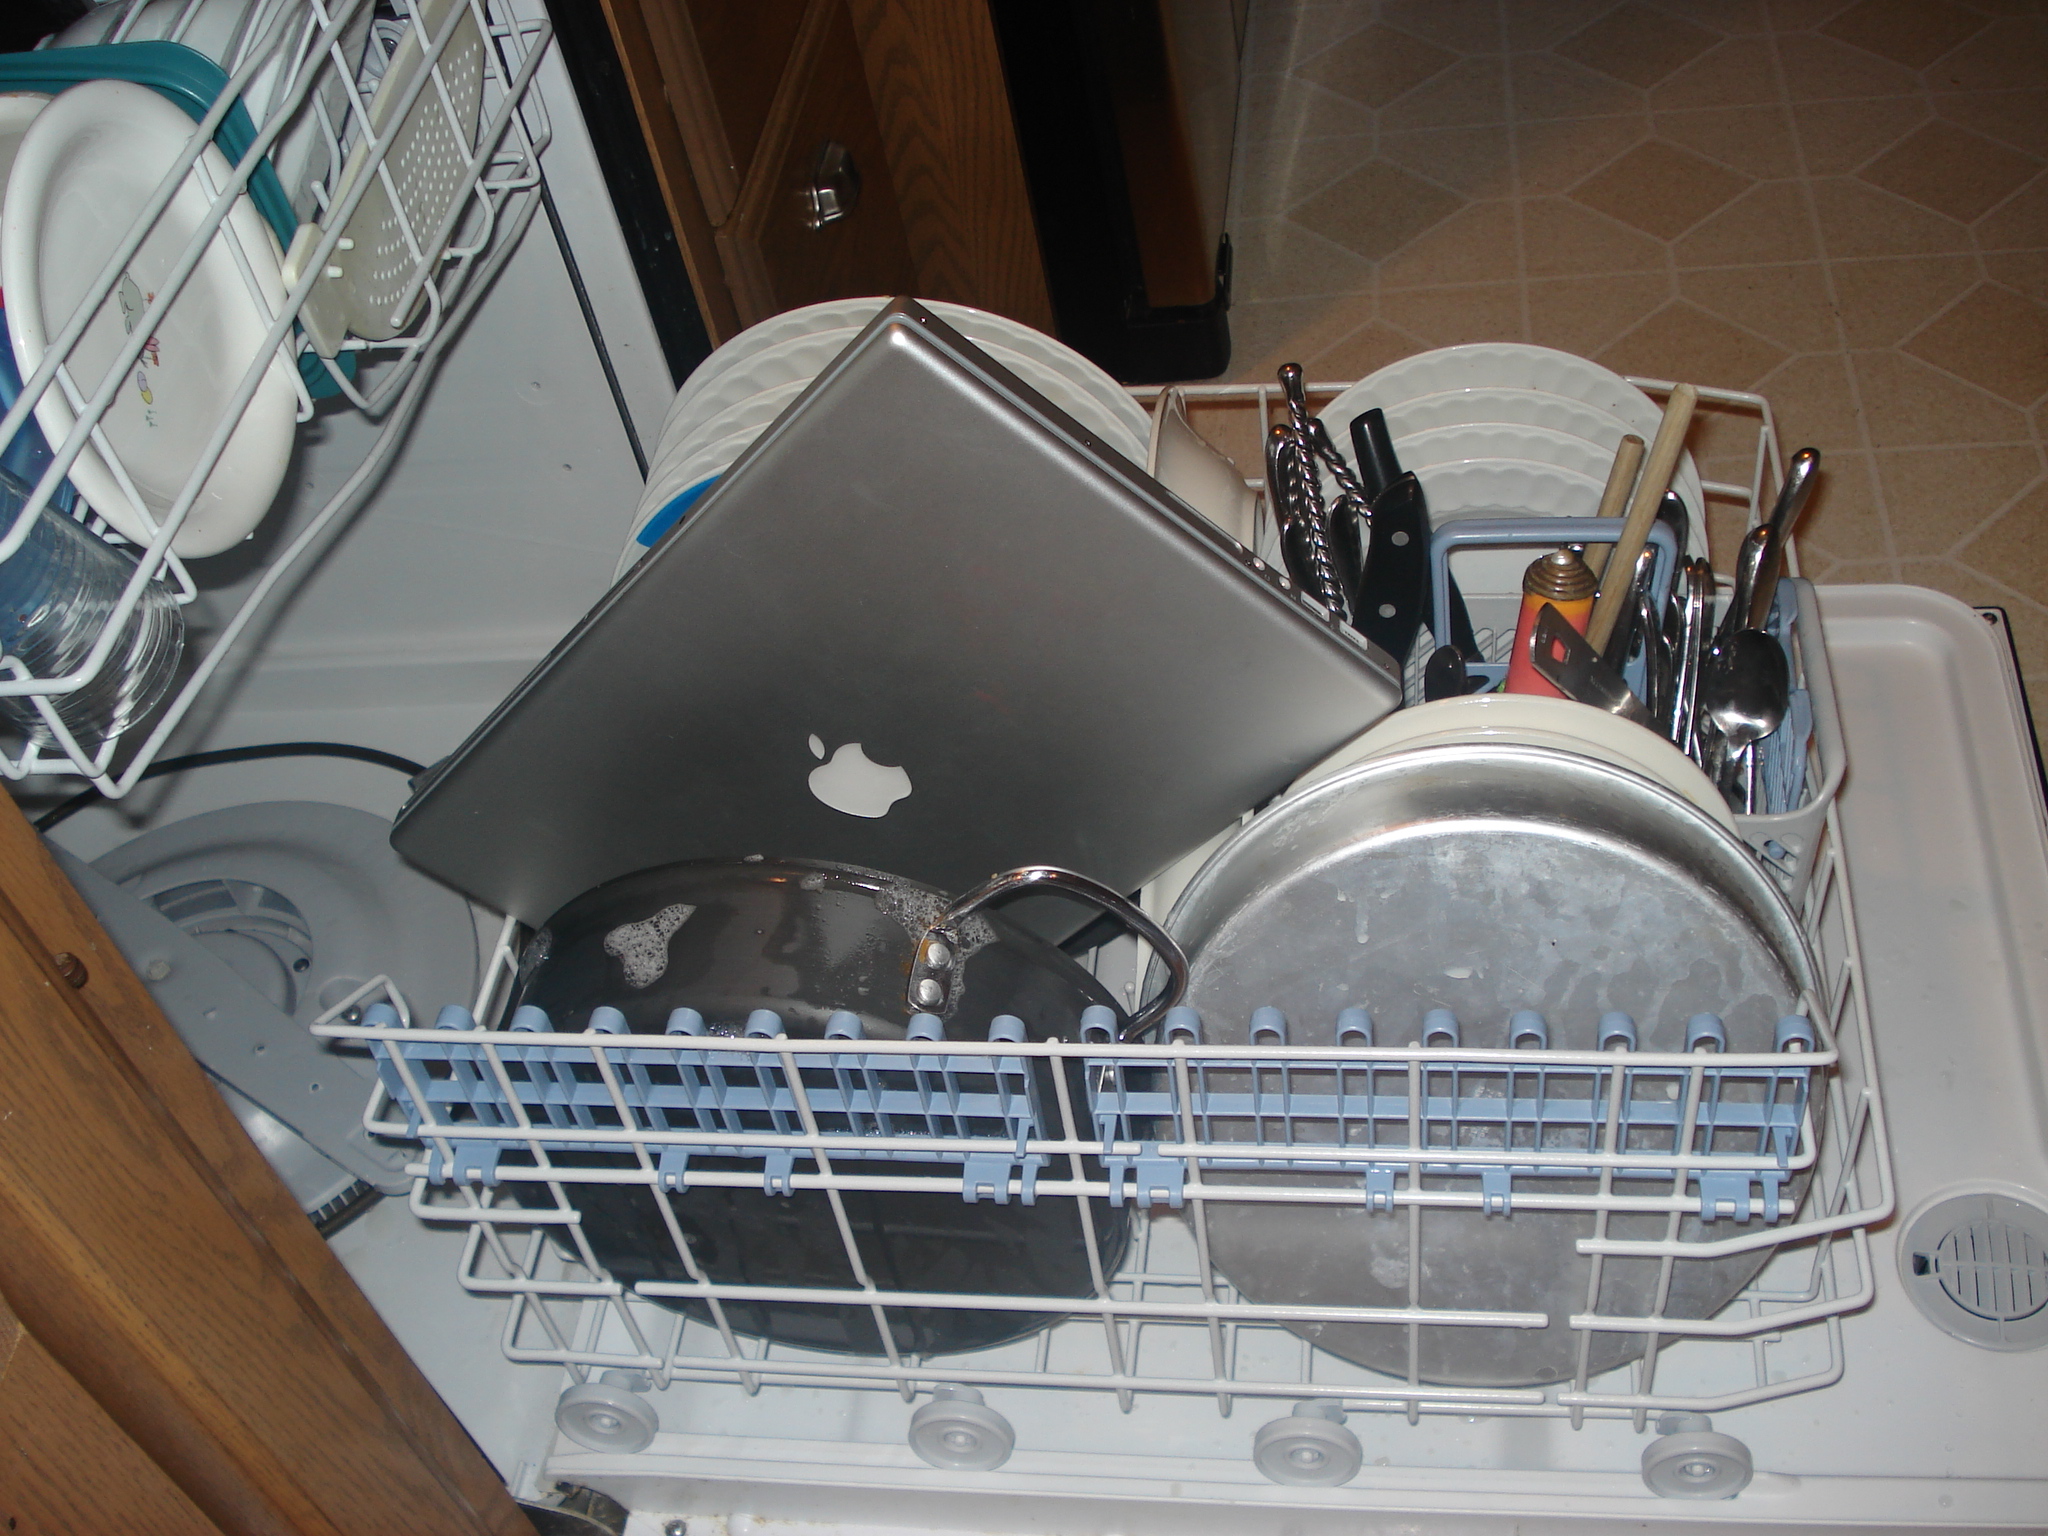 the dishes are in the dishwasher ready to be loaded